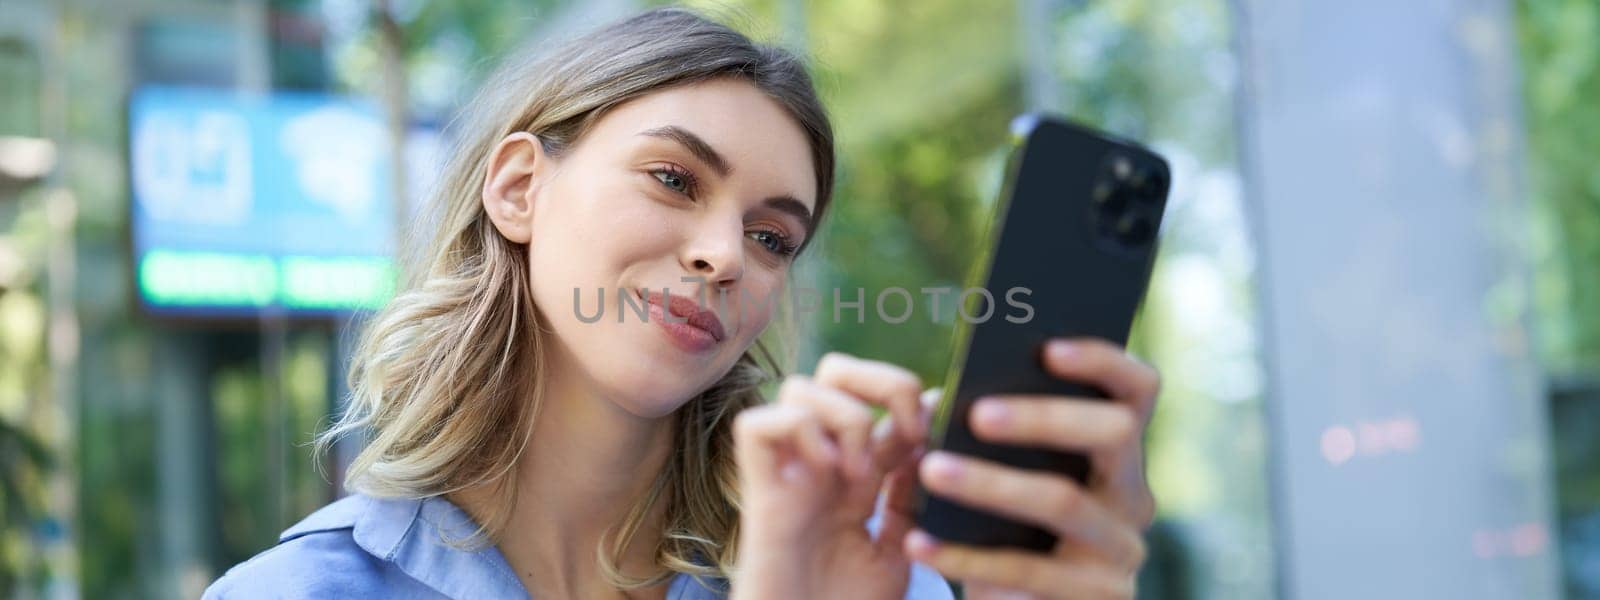 Female employee sitting outdoors and looking at mobile phone, smiling at smartphone screen.